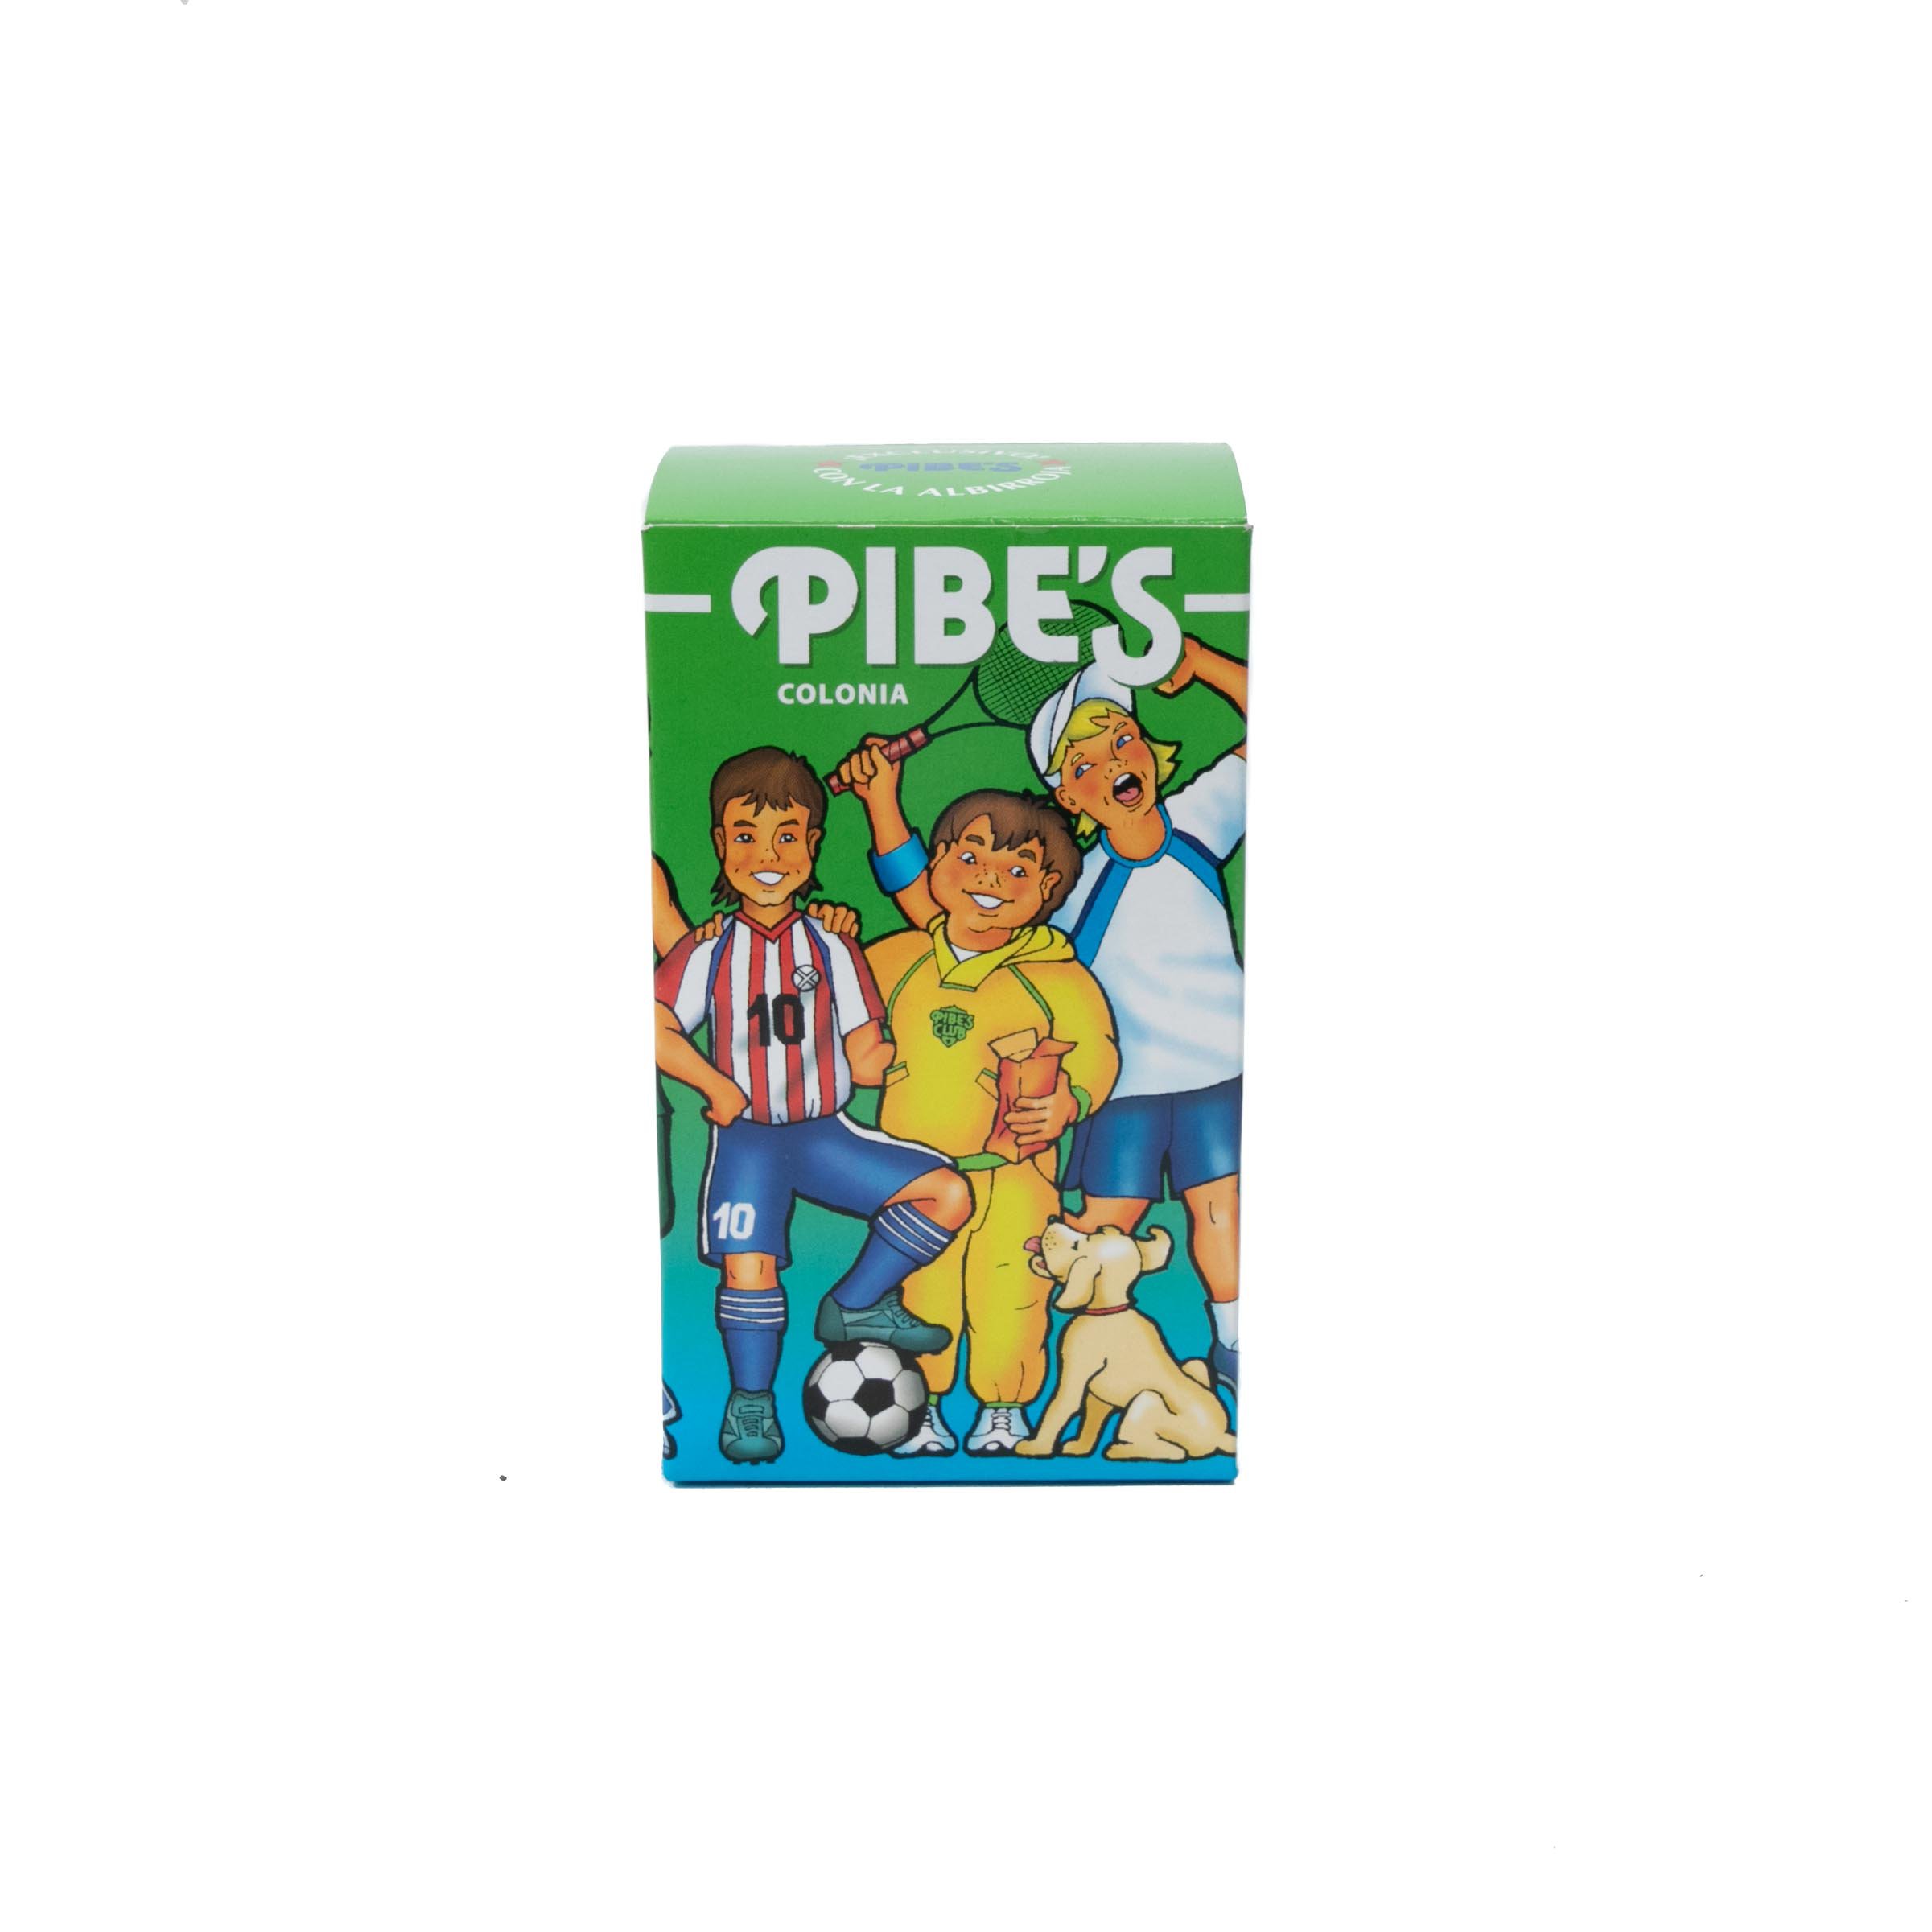 PIBES PARAGUAY COLONIA 80 CC 510